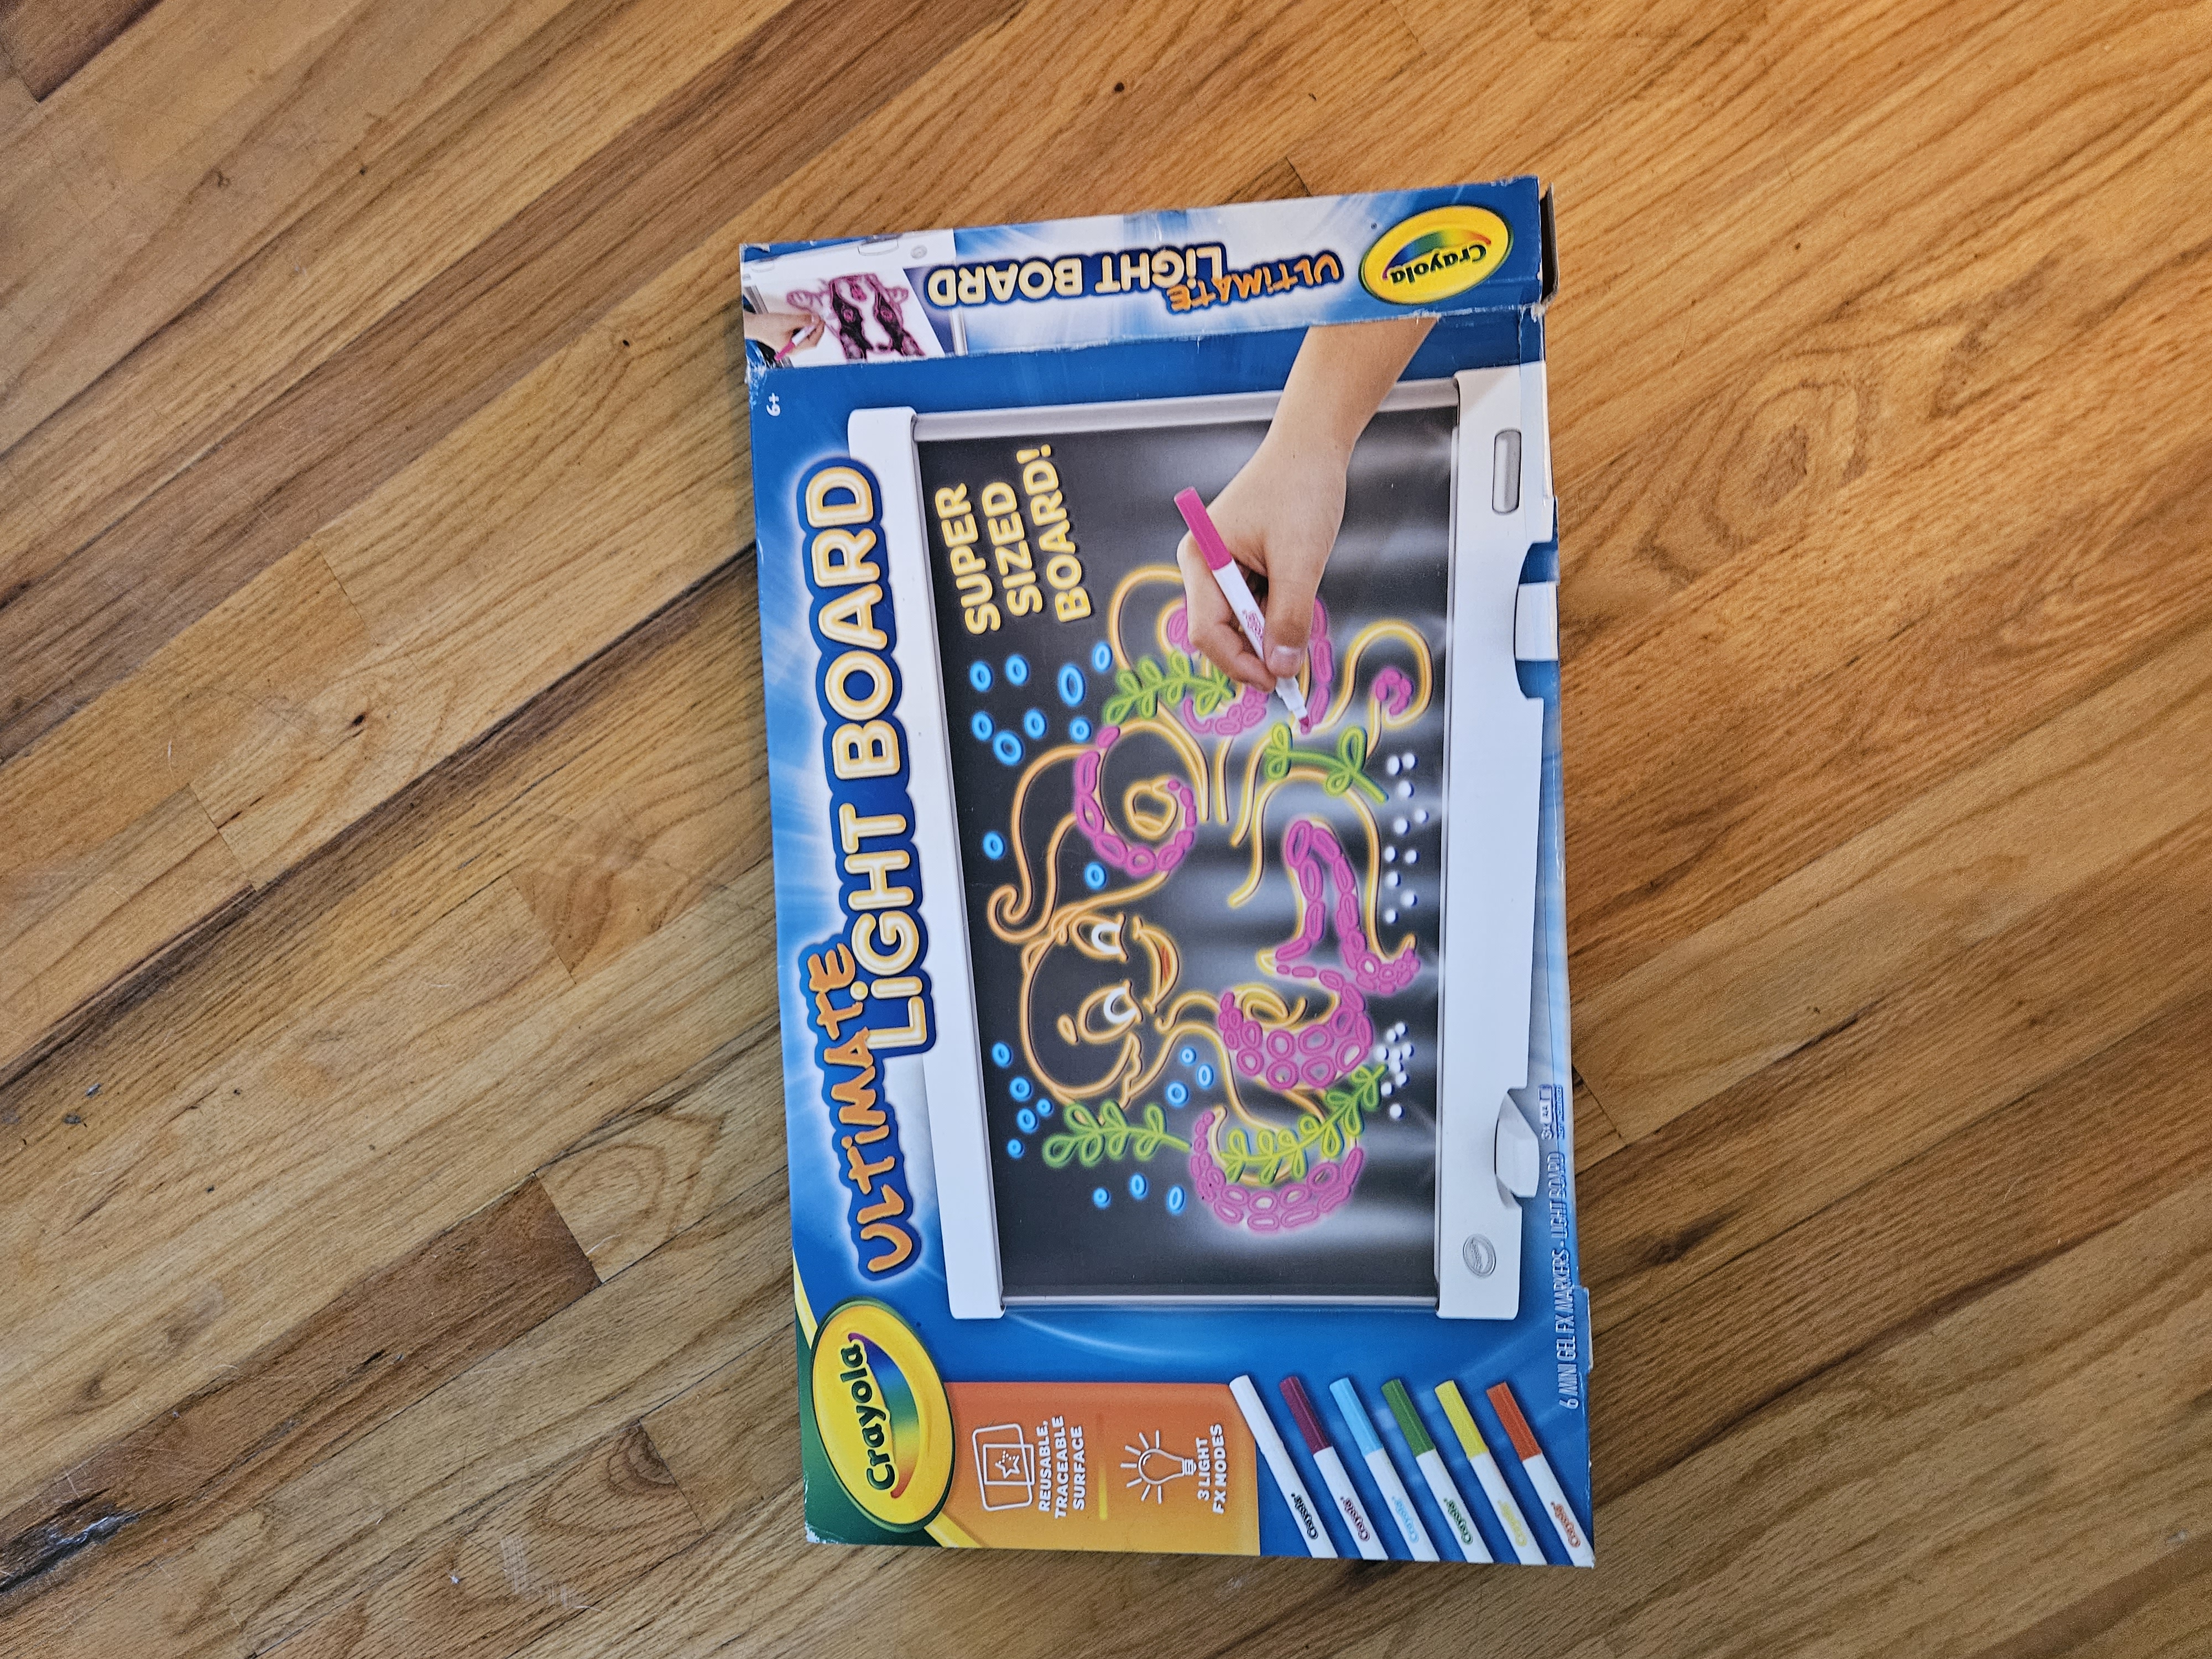 Crayola Ultimate Light Board Super Sized Reusable Traceable Board with 6  Markers